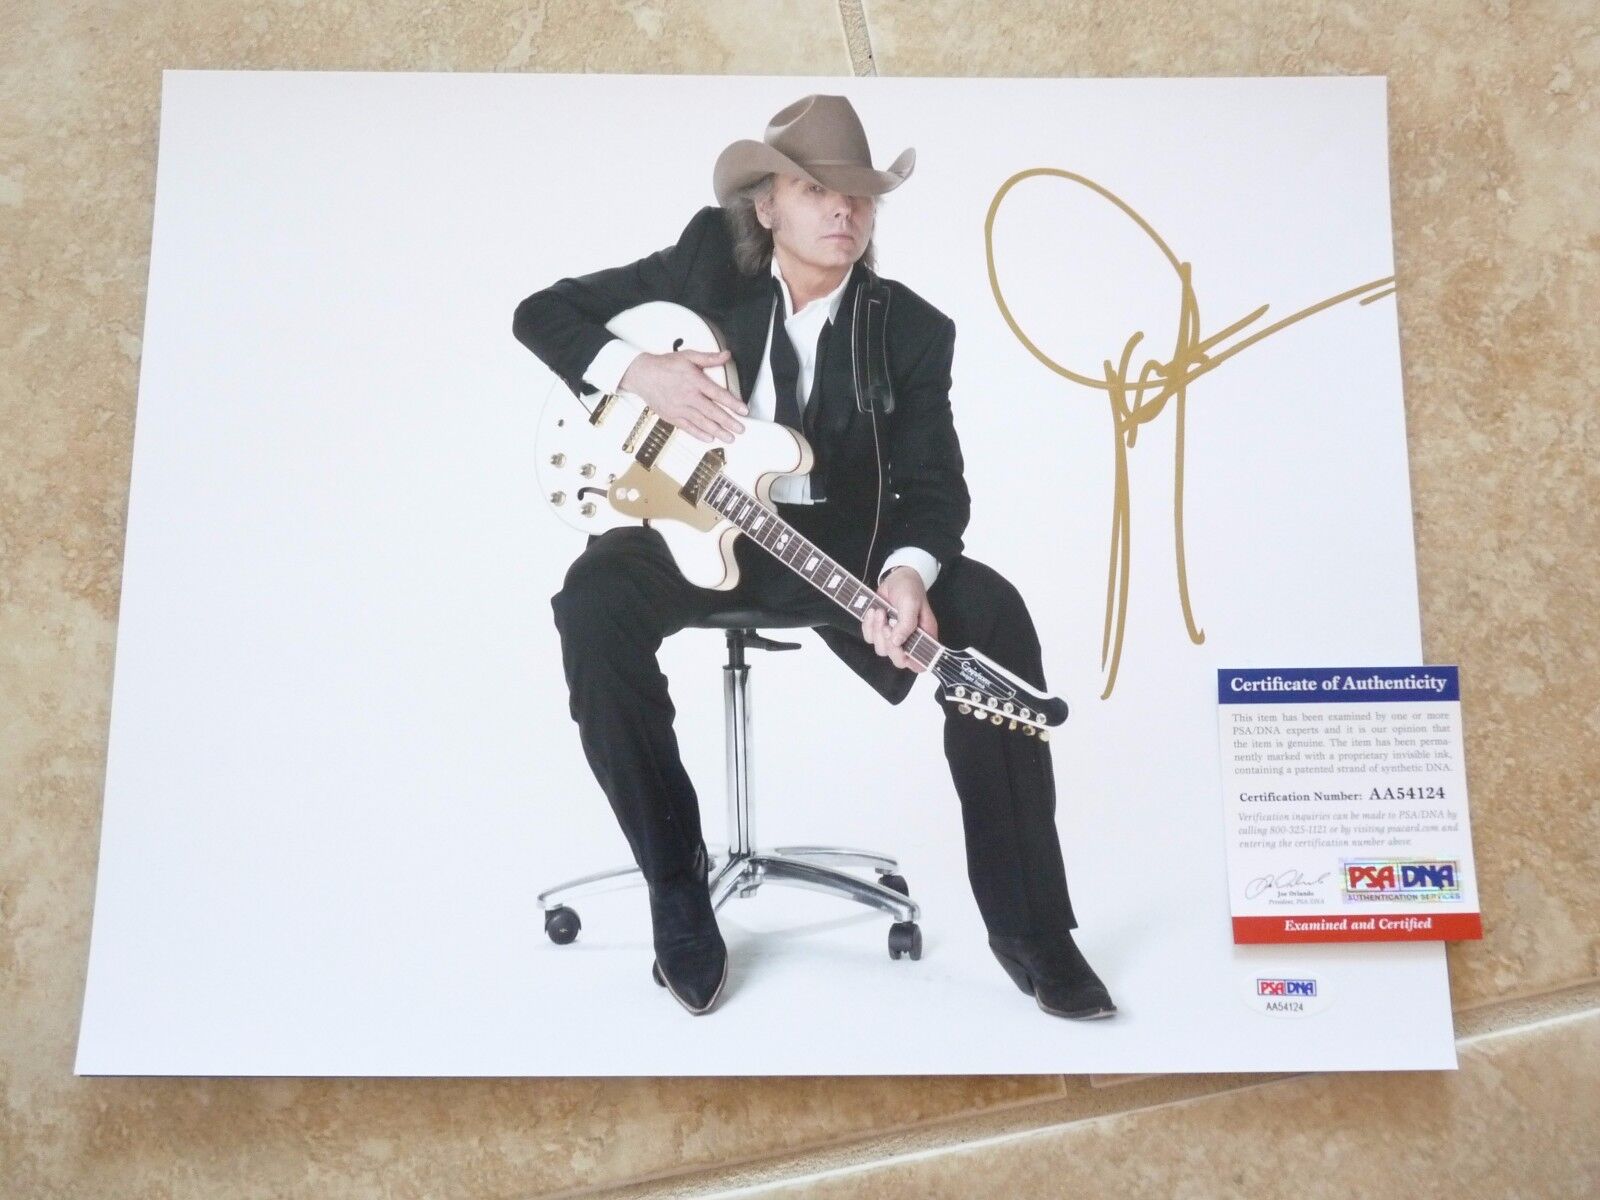 Dwight Yoakam Sexy Country Signed Autographed 11x14 Photo Poster painting PSA Certified #6 F5